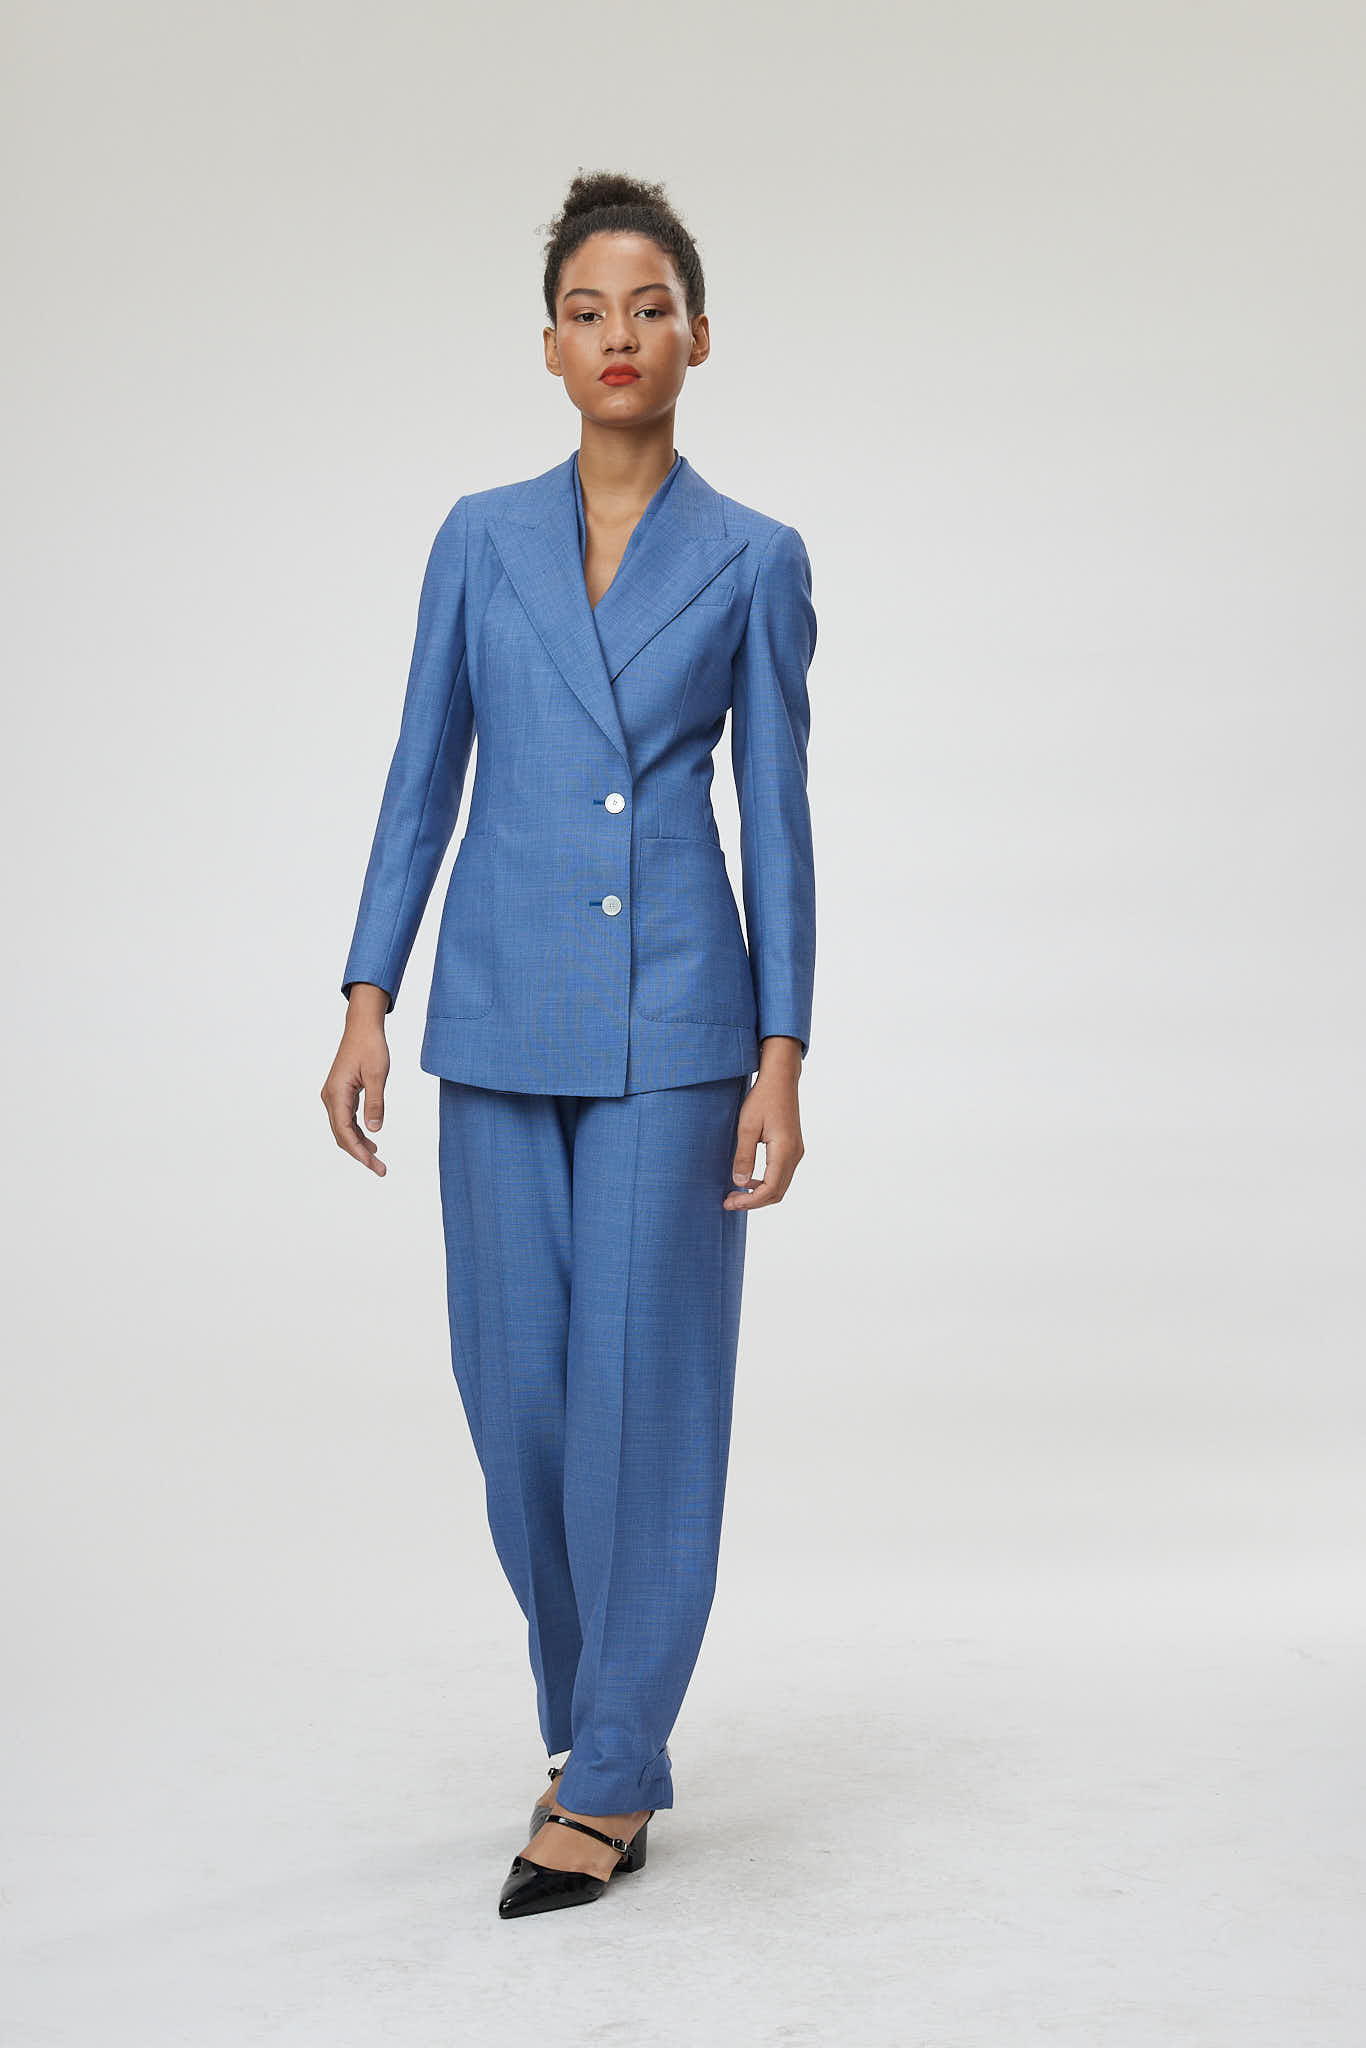 Alessandria Jacket – Classic double breasted suit jacket in royal blue